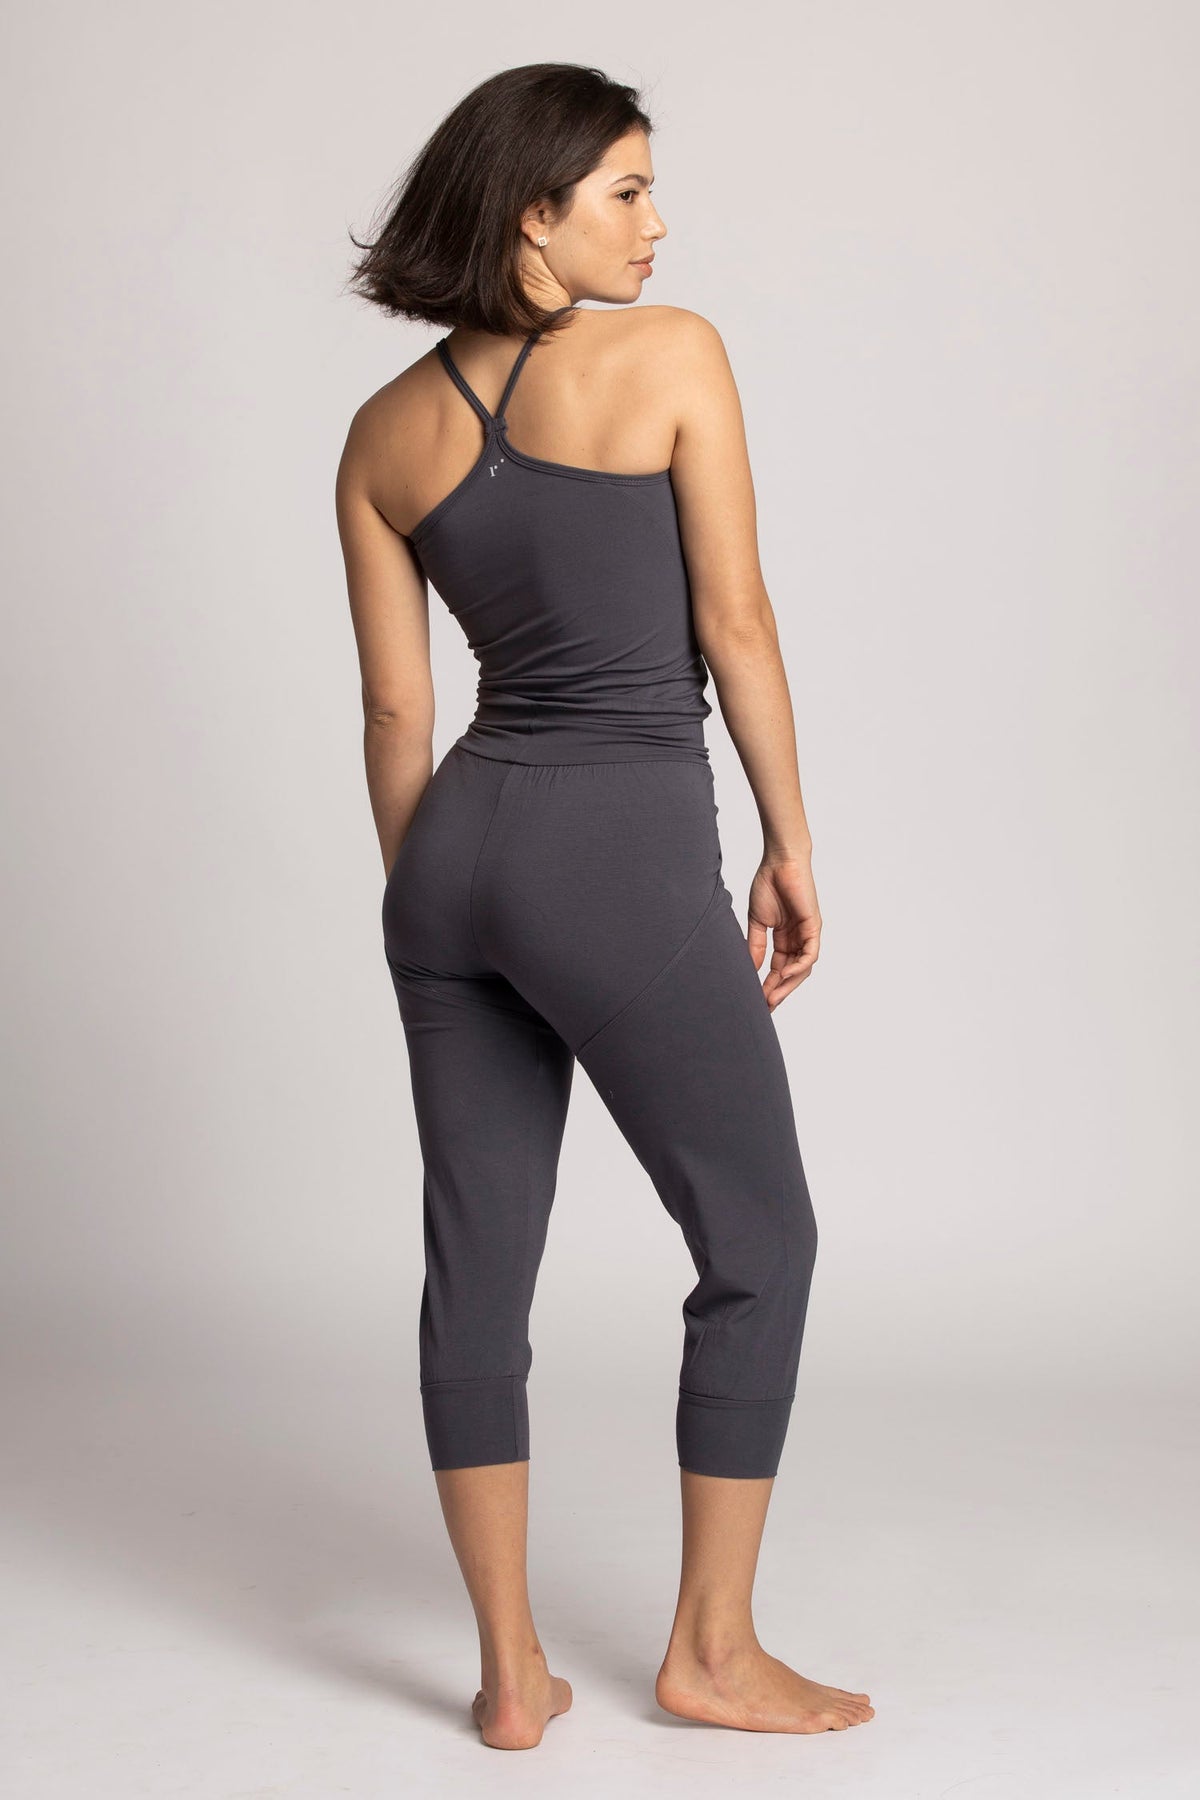 50%off I’mPerfect Organic Cotton Yoga Jumpsuit was 35%off